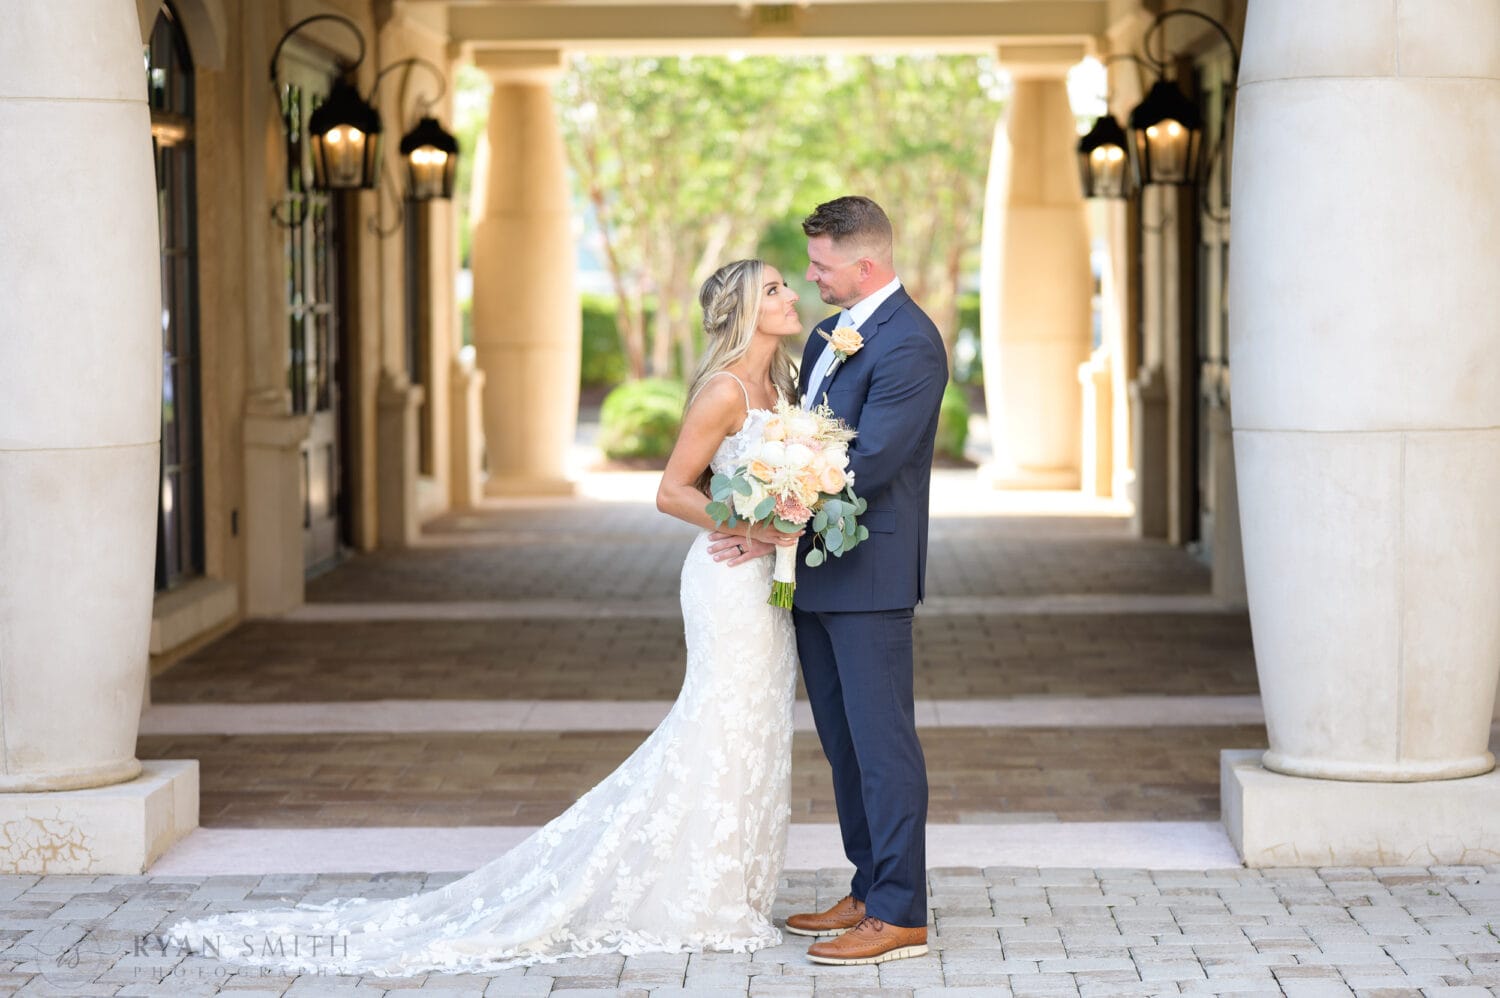 Bride and groom portraits in the shade of the courtyard walkway - 21 Main Events